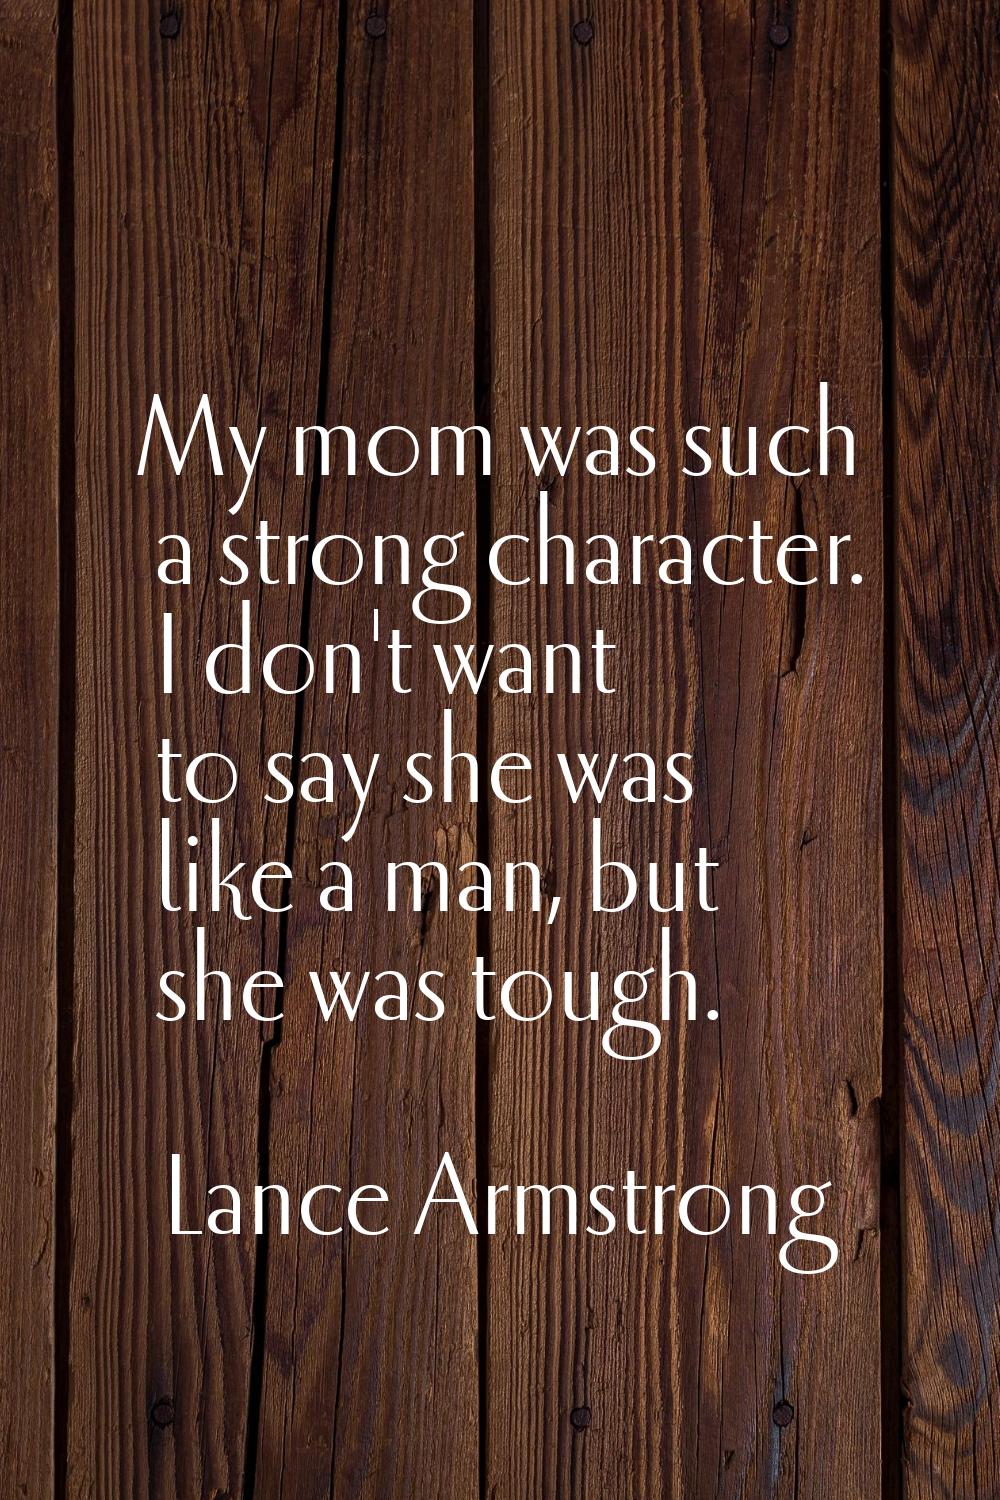 My mom was such a strong character. I don't want to say she was like a man, but she was tough.